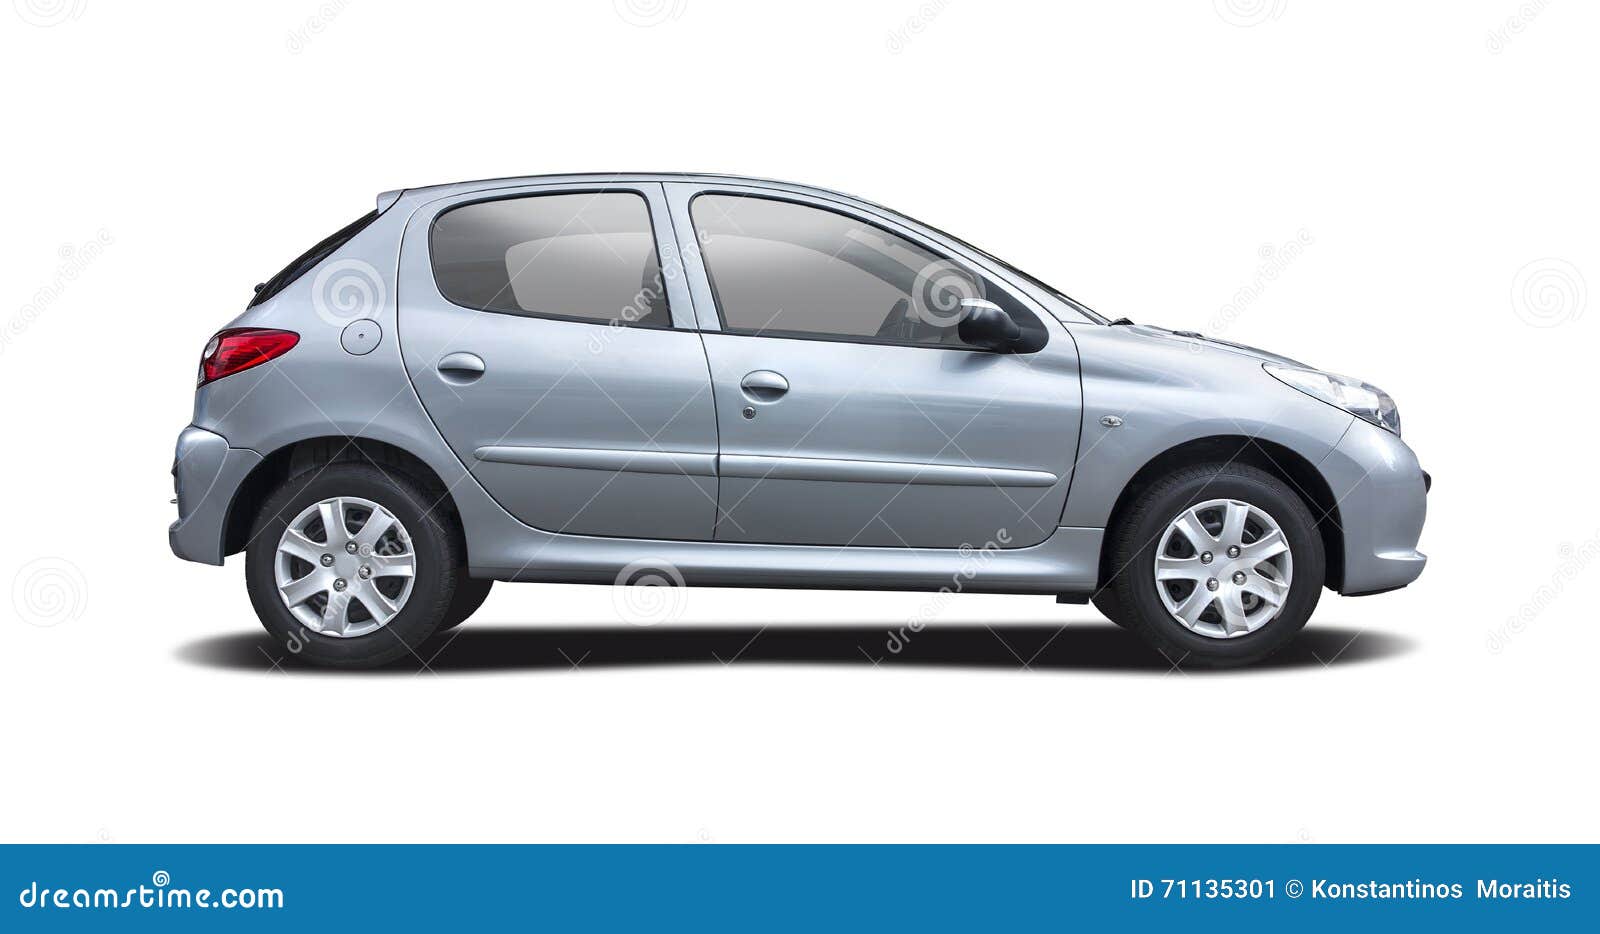 Peugeot 206 on white stock image. Image of view, small - 71135301